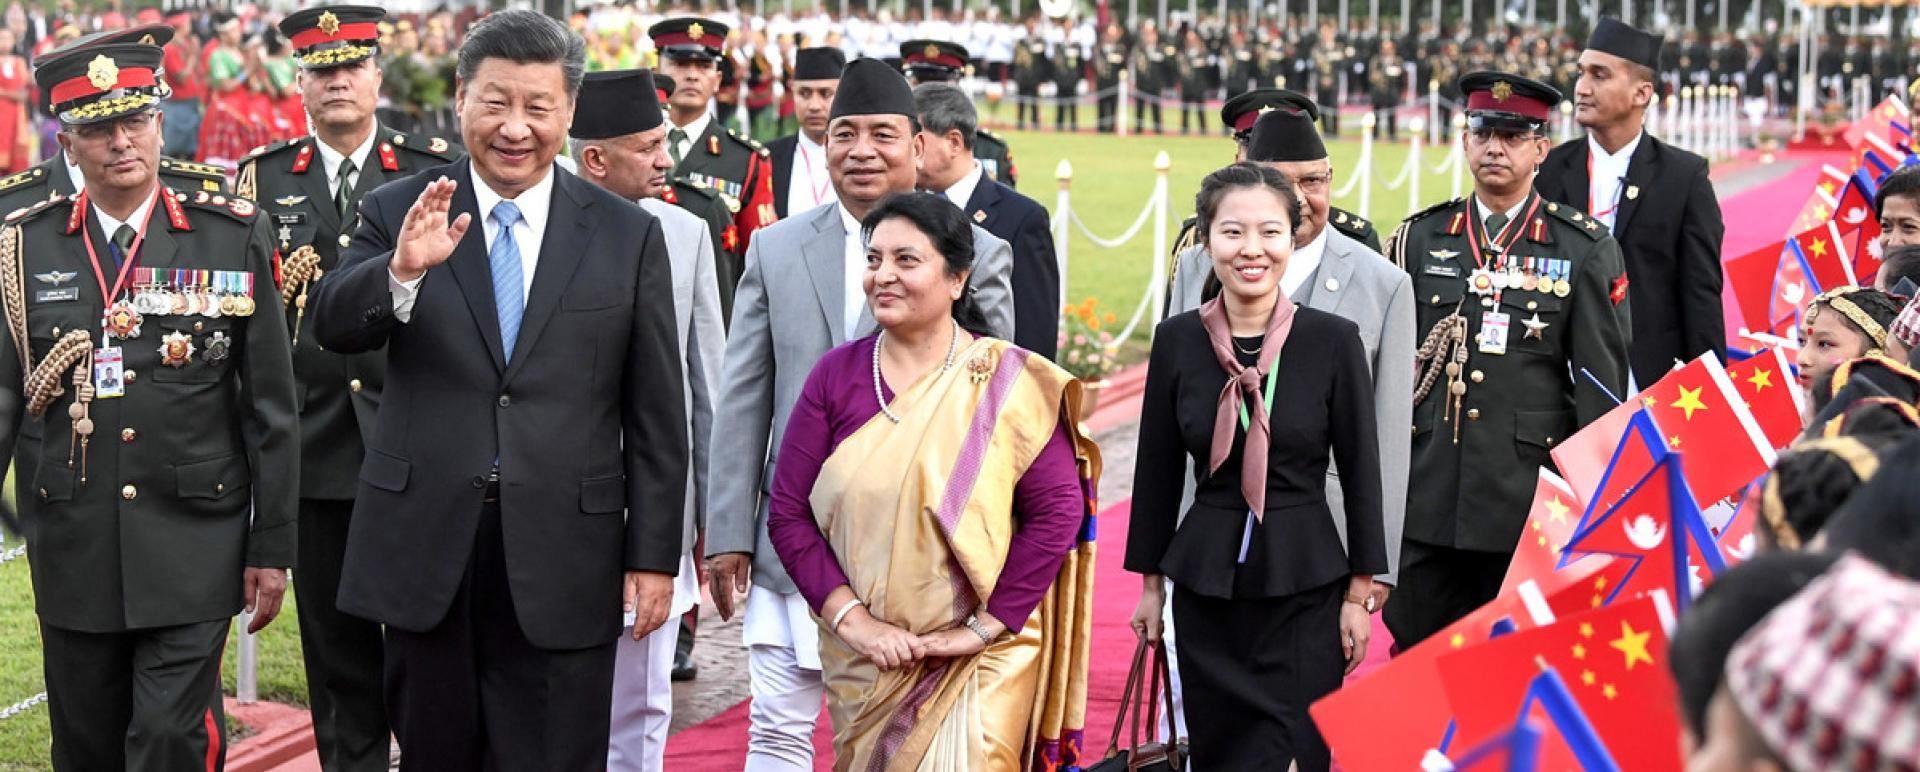 President Xi Jinping, accompanied by President Bidya Devi Bhandari of Nepal, greets crowds after arriving in Kathmandu, the country’s capital, on Saturday. Xi’s state visit marks the first by a Chinese president to Nepal in 23 years. [GAO JIE / XINHUA] 